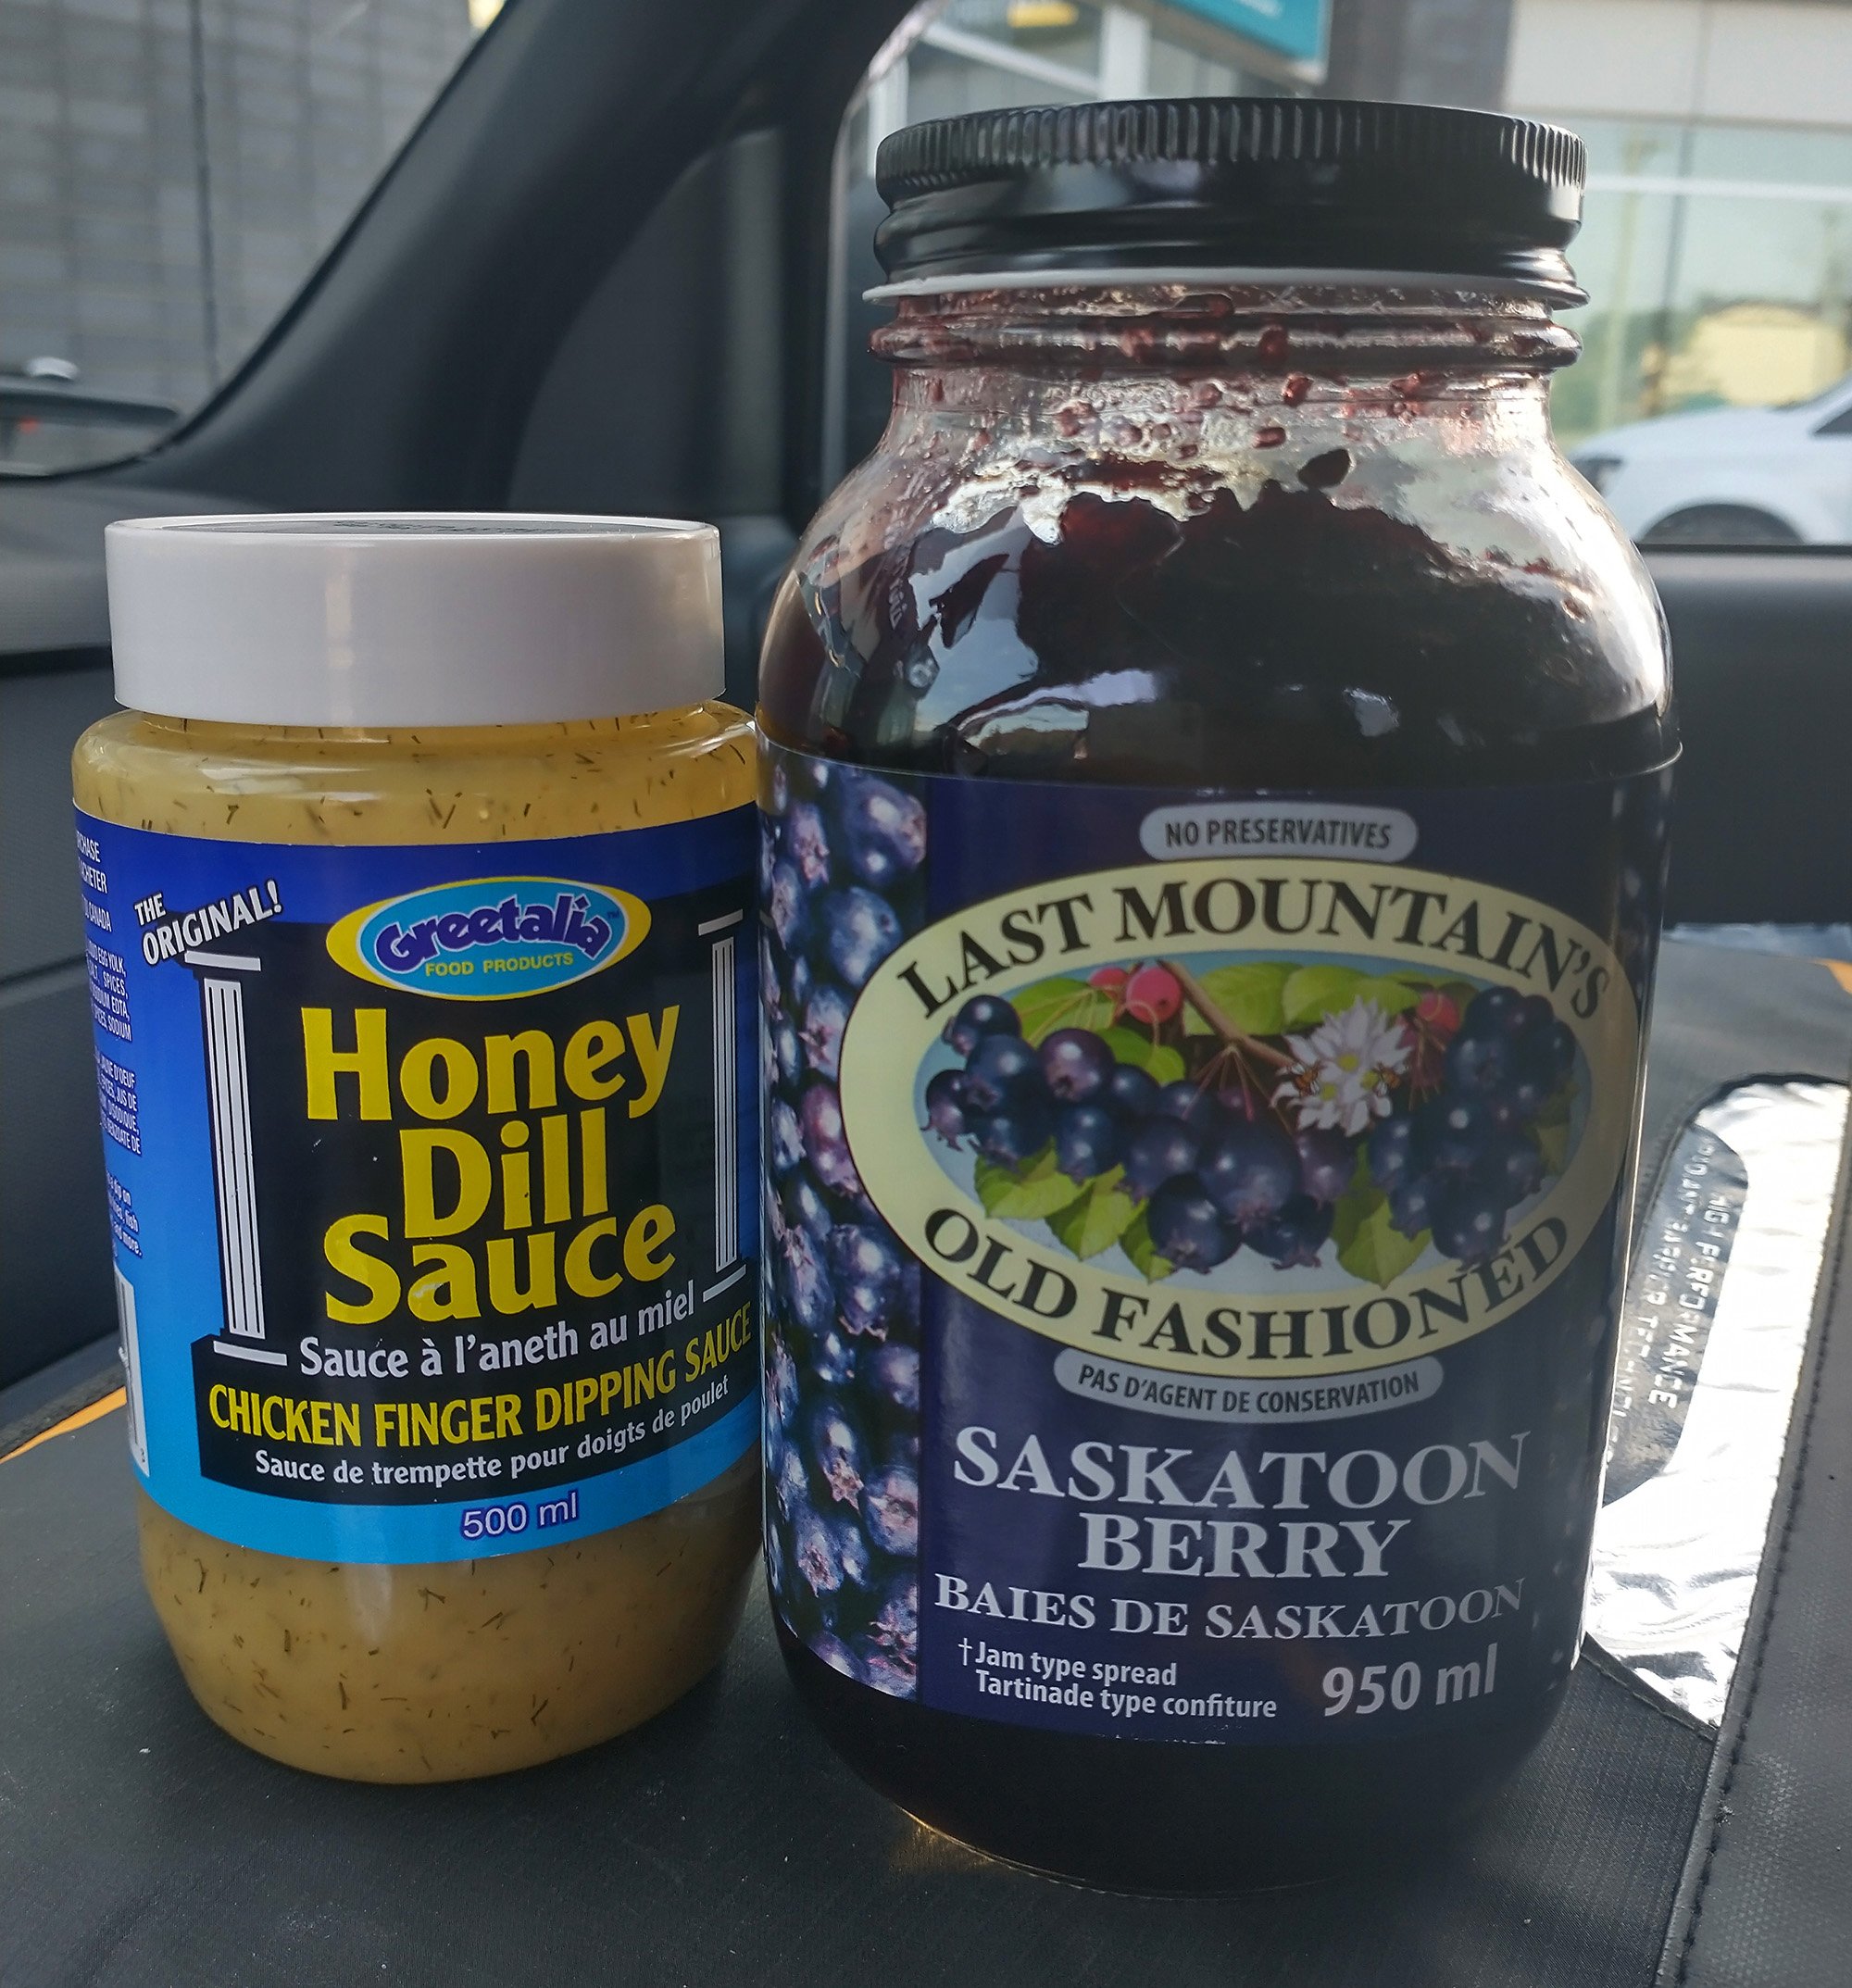 Honey Dill is a Manitoba thing, apparently. It's mayonaise + honey + dill. Very gross. Saskatoon berries taste like blueberries. More of a general prairies fruit.